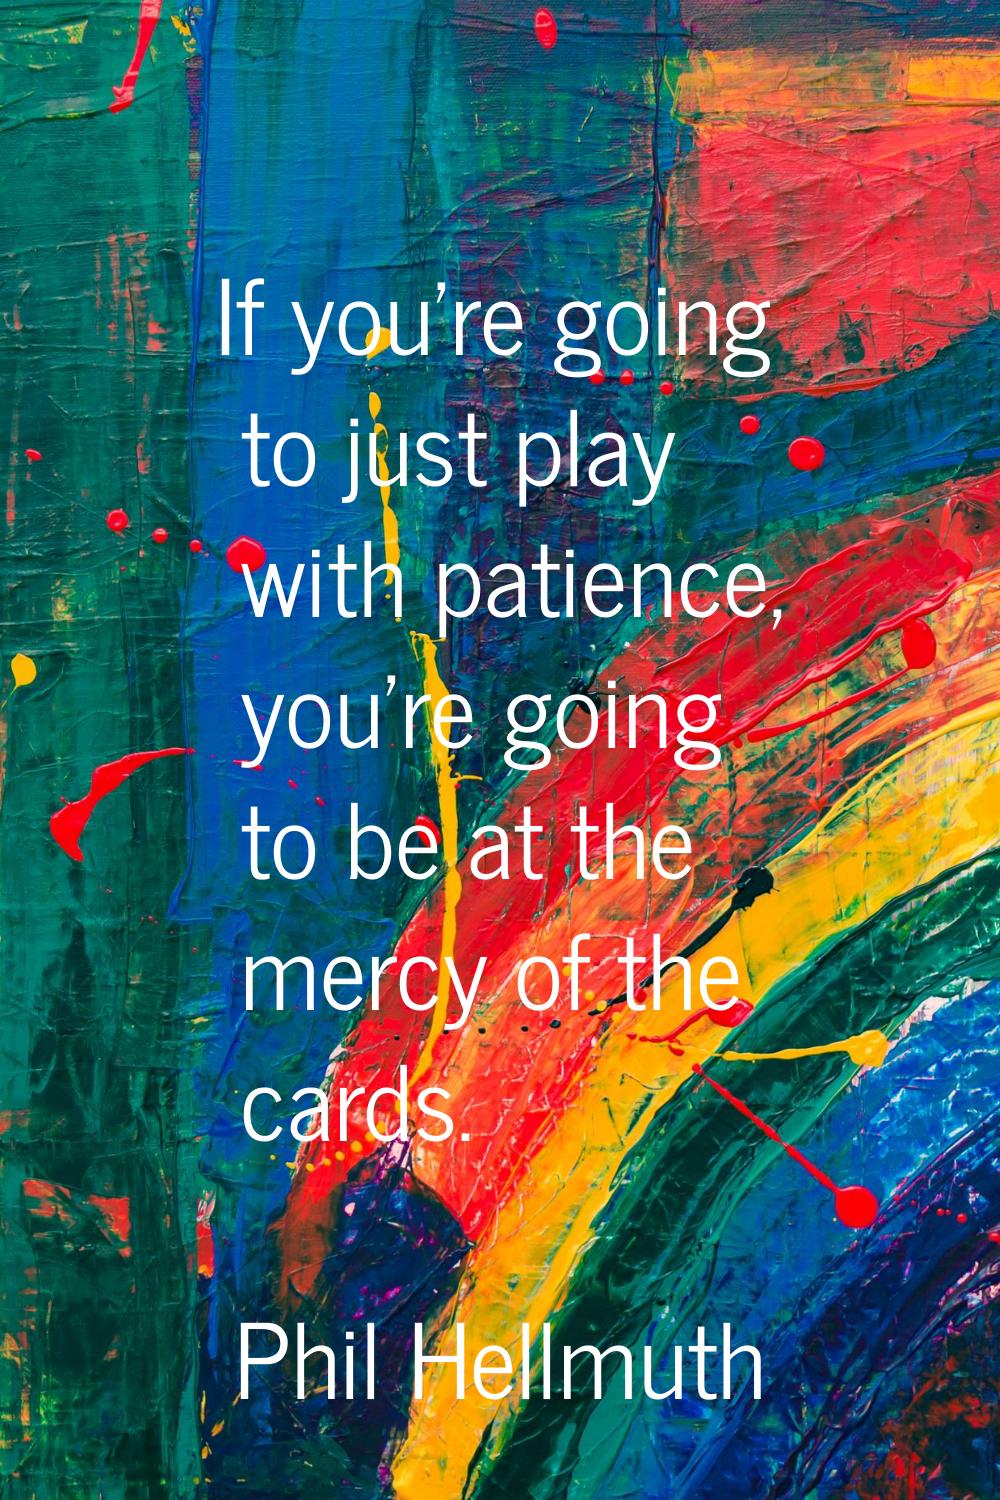 If you're going to just play with patience, you're going to be at the mercy of the cards.